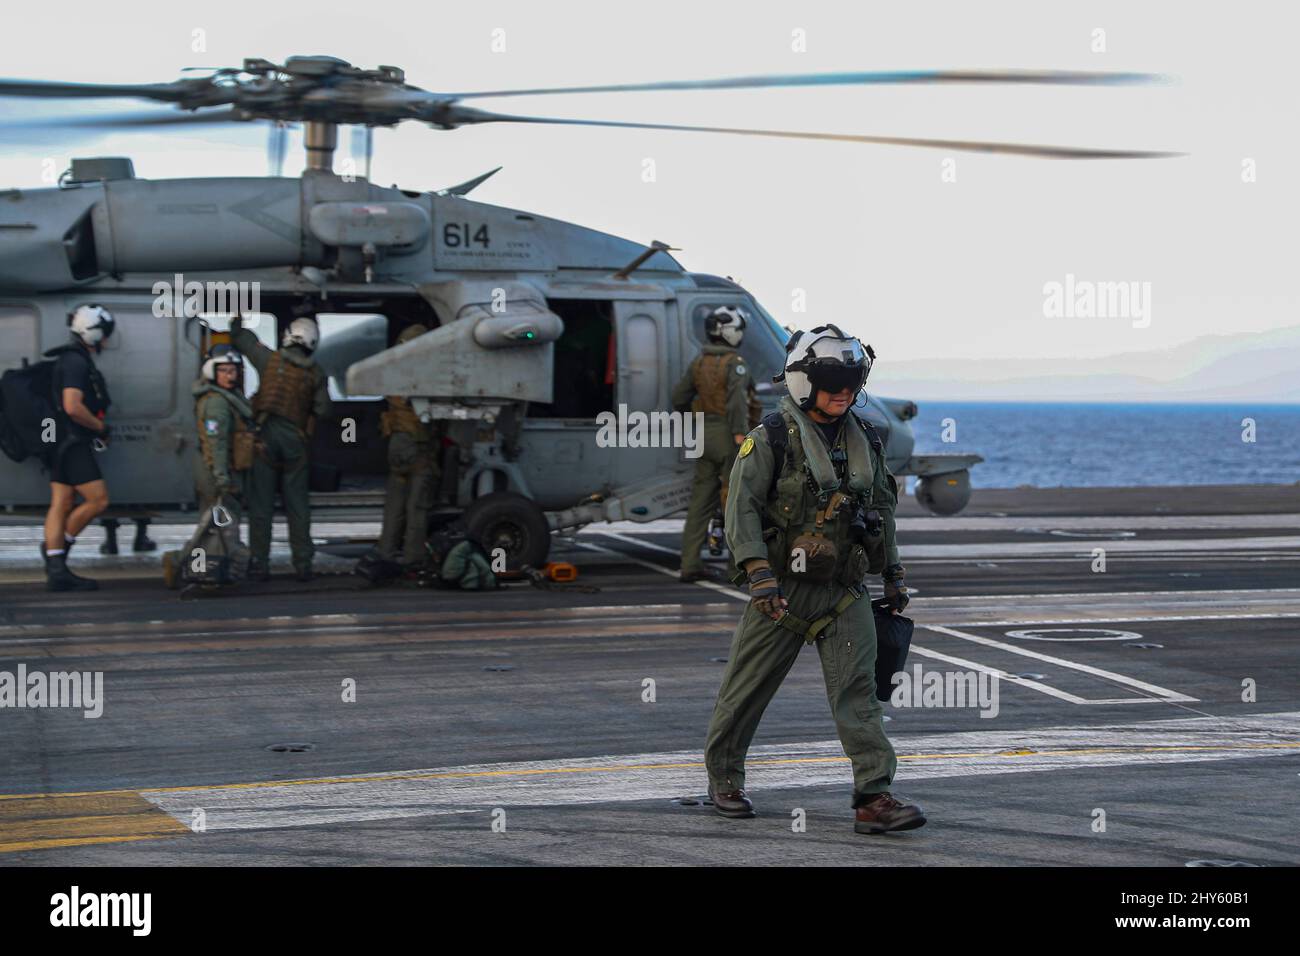 PHILIPPINE SEA (March 13, 2022) Cmdr. Brian Truong, commanding officer of the “Chargers” of Helicopter Sea Combat Squadron (HSC) 14, swaps out of an MH-60S Sea Hawk helicopter on the flight deck of the Nimitz-class aircraft carrier USS Abraham Lincoln (CVN 72). Abraham Lincoln Strike Group is on a scheduled deployment in the U.S. 7th Fleet area of operations to enhance interoperability through alliances and partnerships while serving as a ready-response force in support of a free and open Indo-Pacific region. (U.S. Navy photo by Mass Communication Specialist 3rd Class Javier Reyes) Stock Photo